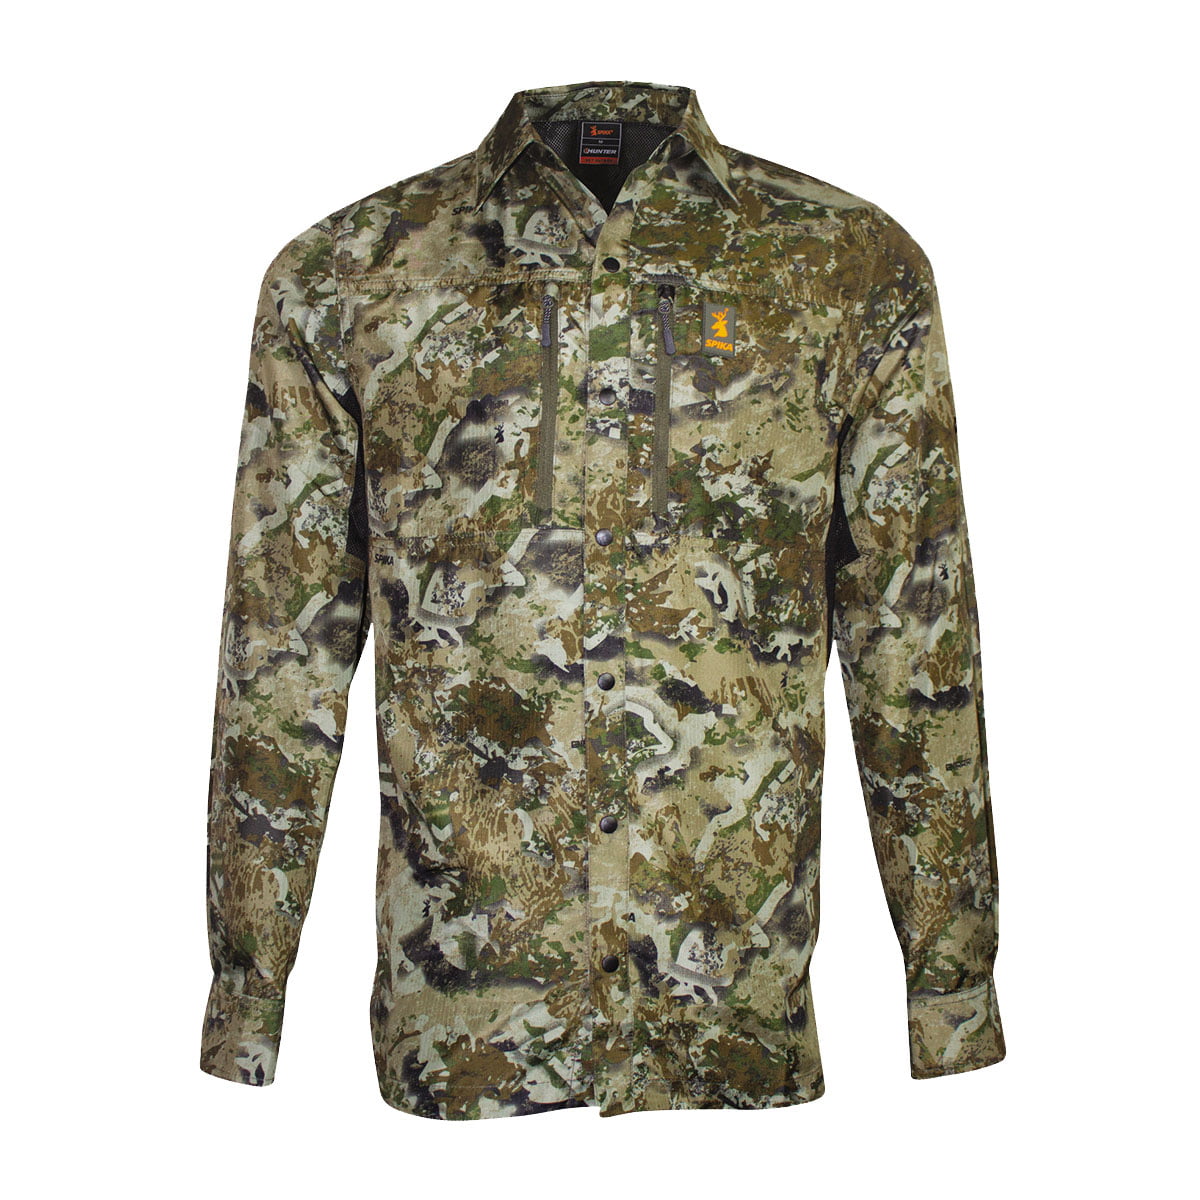 Spika Guide FlyLite Shirt - S / BIARRI CAMO - Mansfield Hunting & Fishing - Products to prepare for Corona Virus